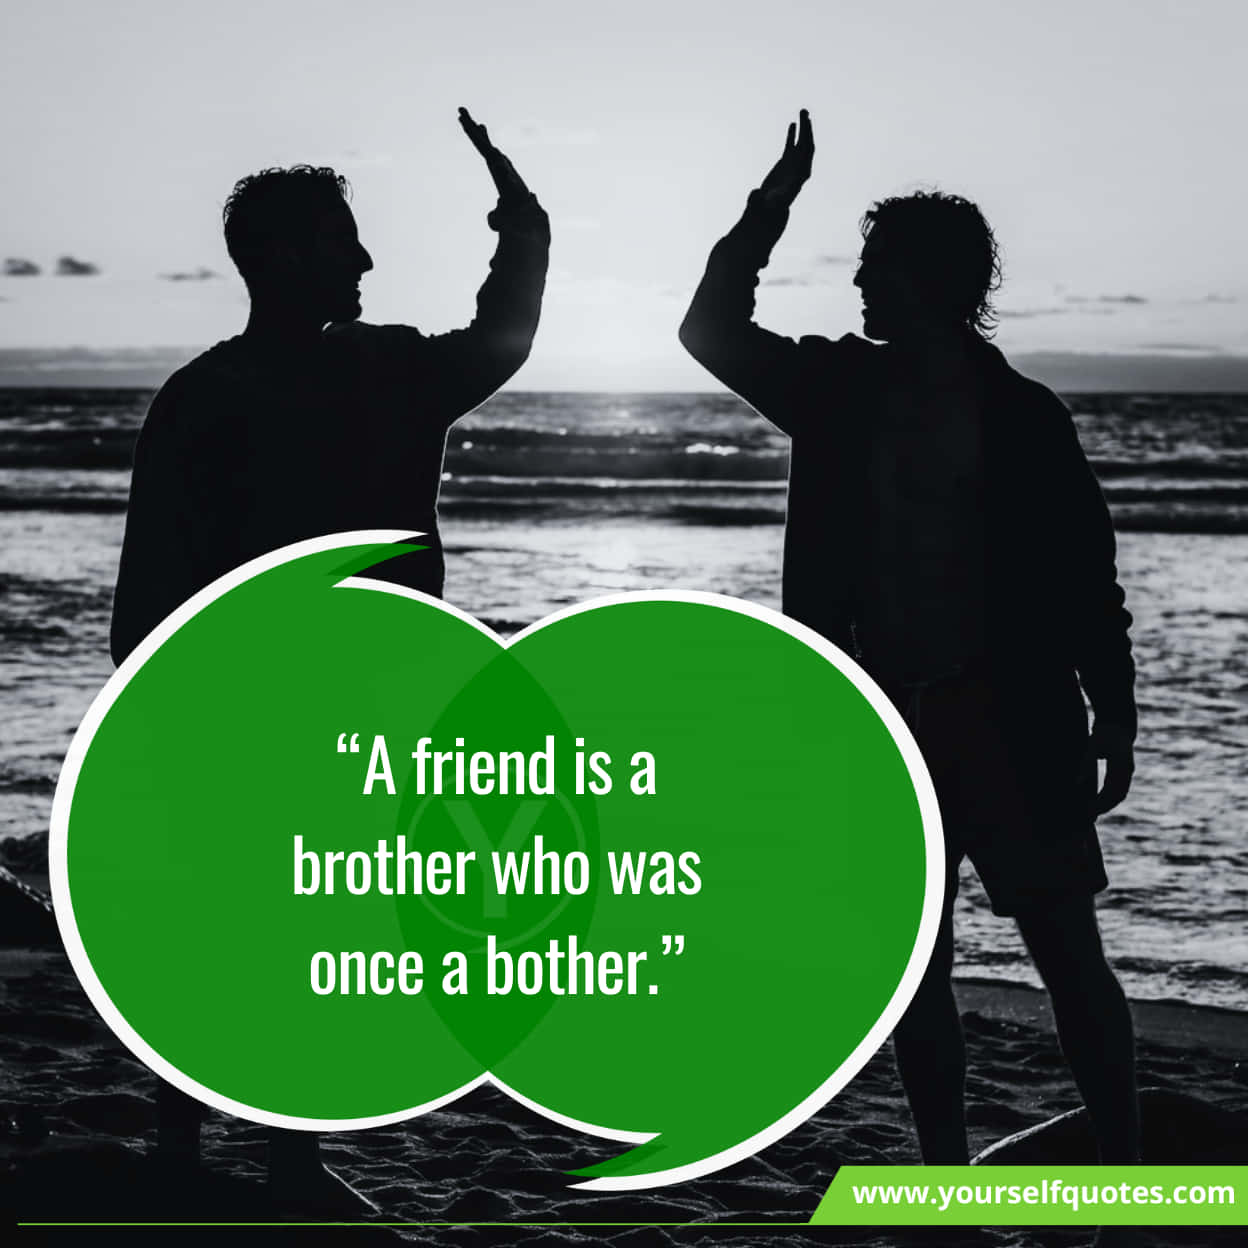 Inspirational Quotes On Brother